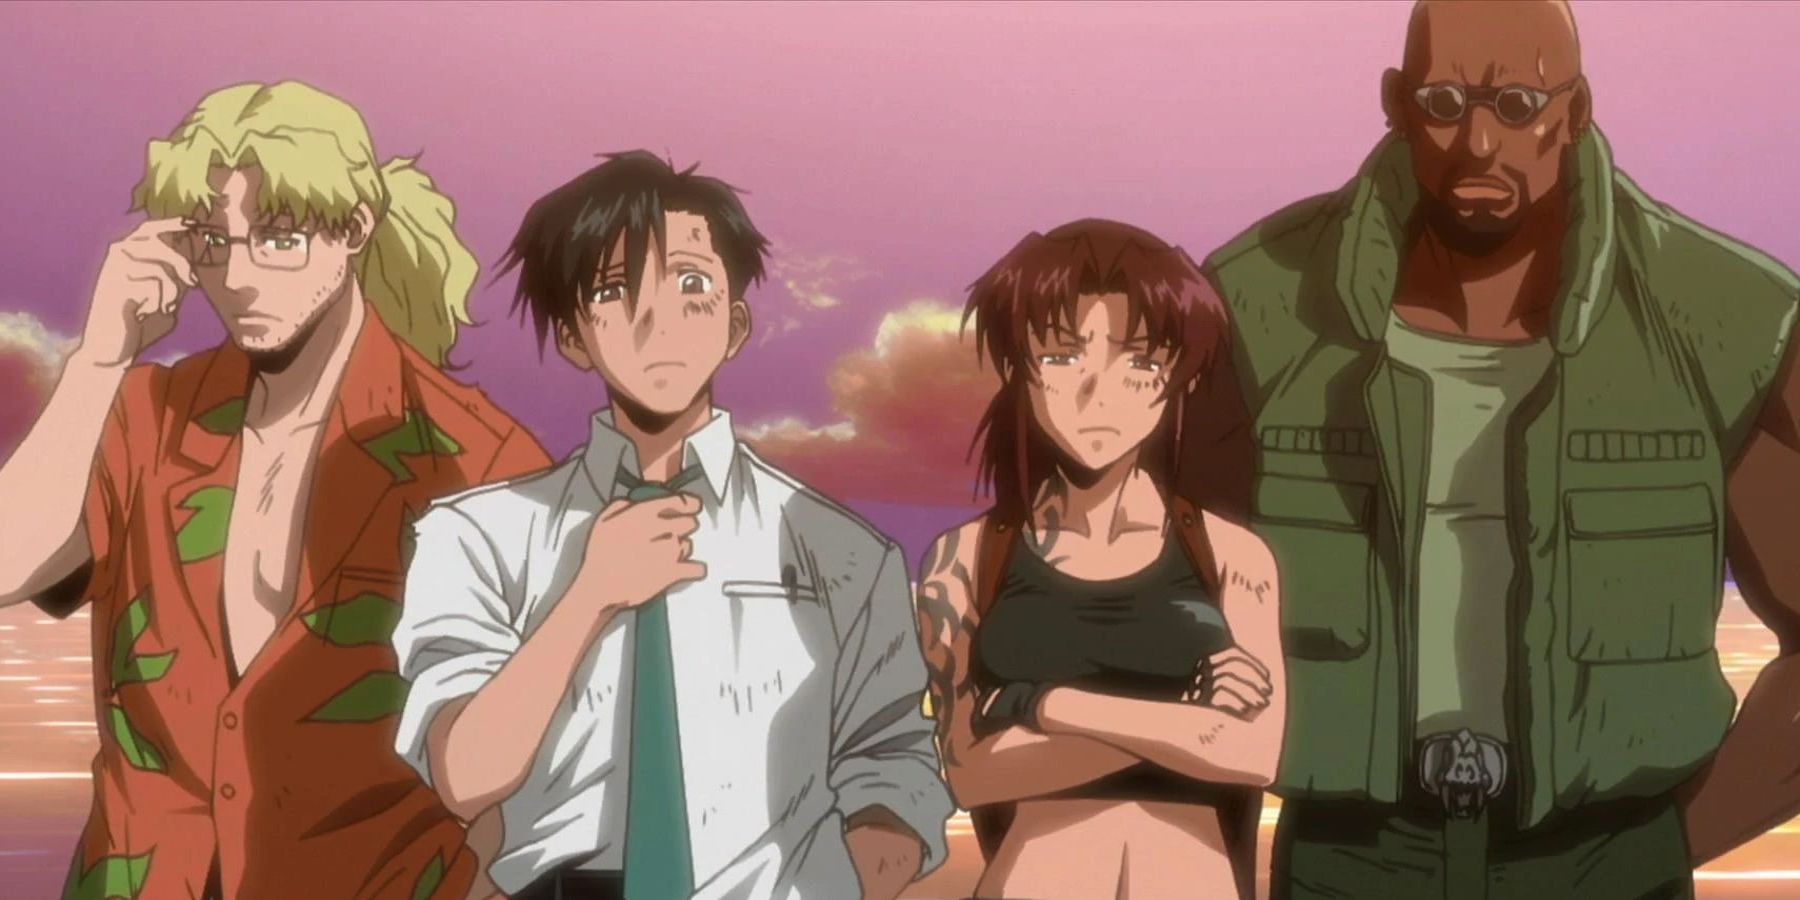 Characters from the anime series Black Lagoon.